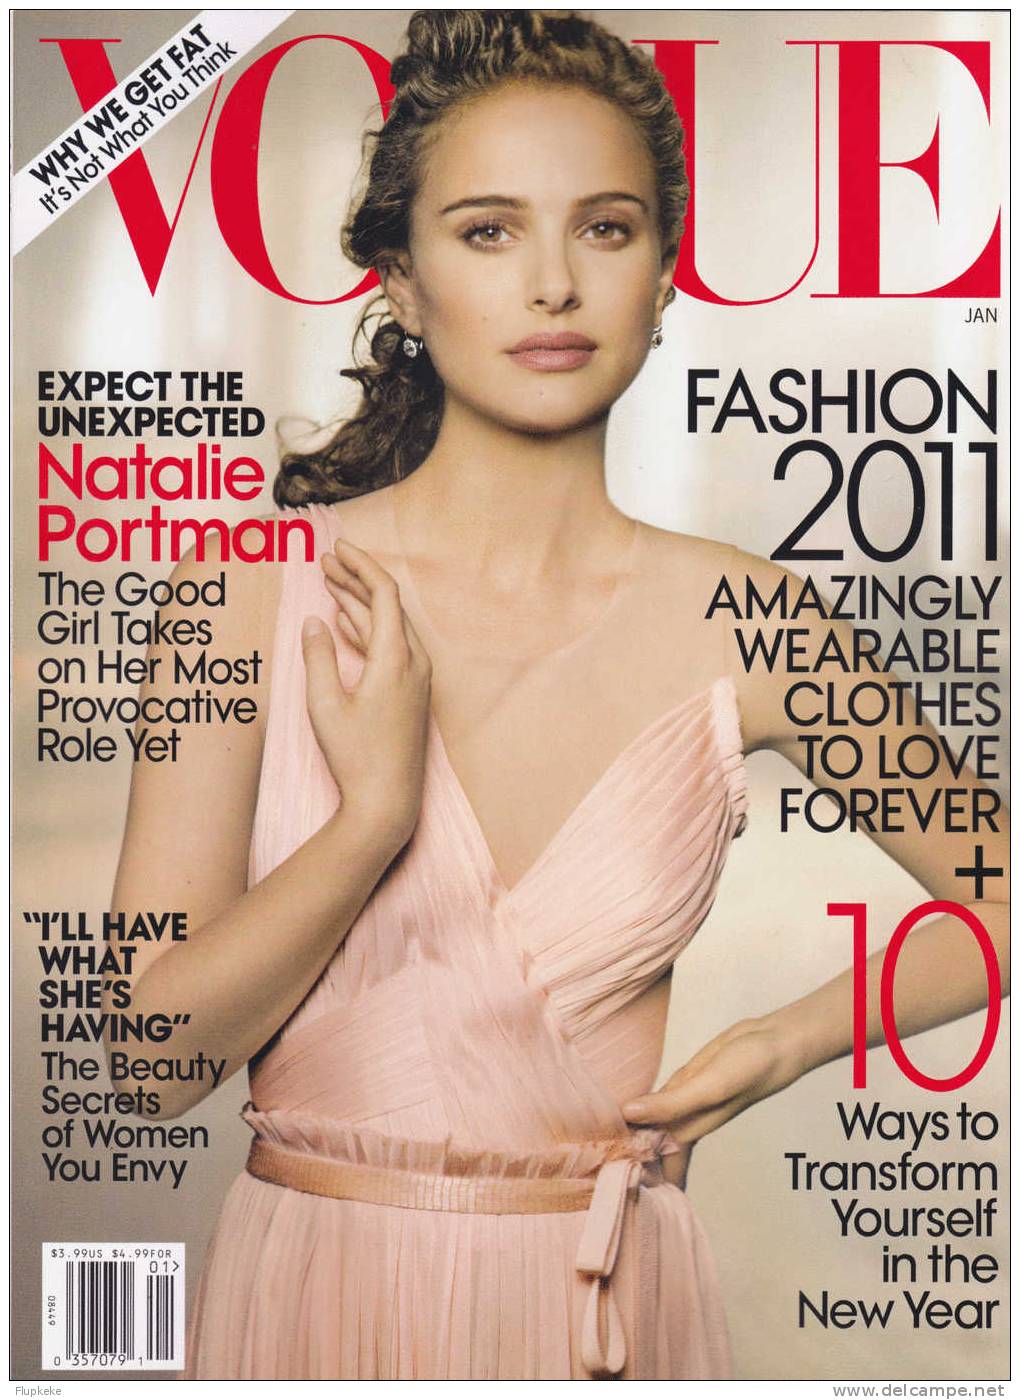 Vogue January 2011 Cover Natalie Portman Expect The Unexpected The Good Girl Takes On Her Most Provocative Role Yet - Entertainment